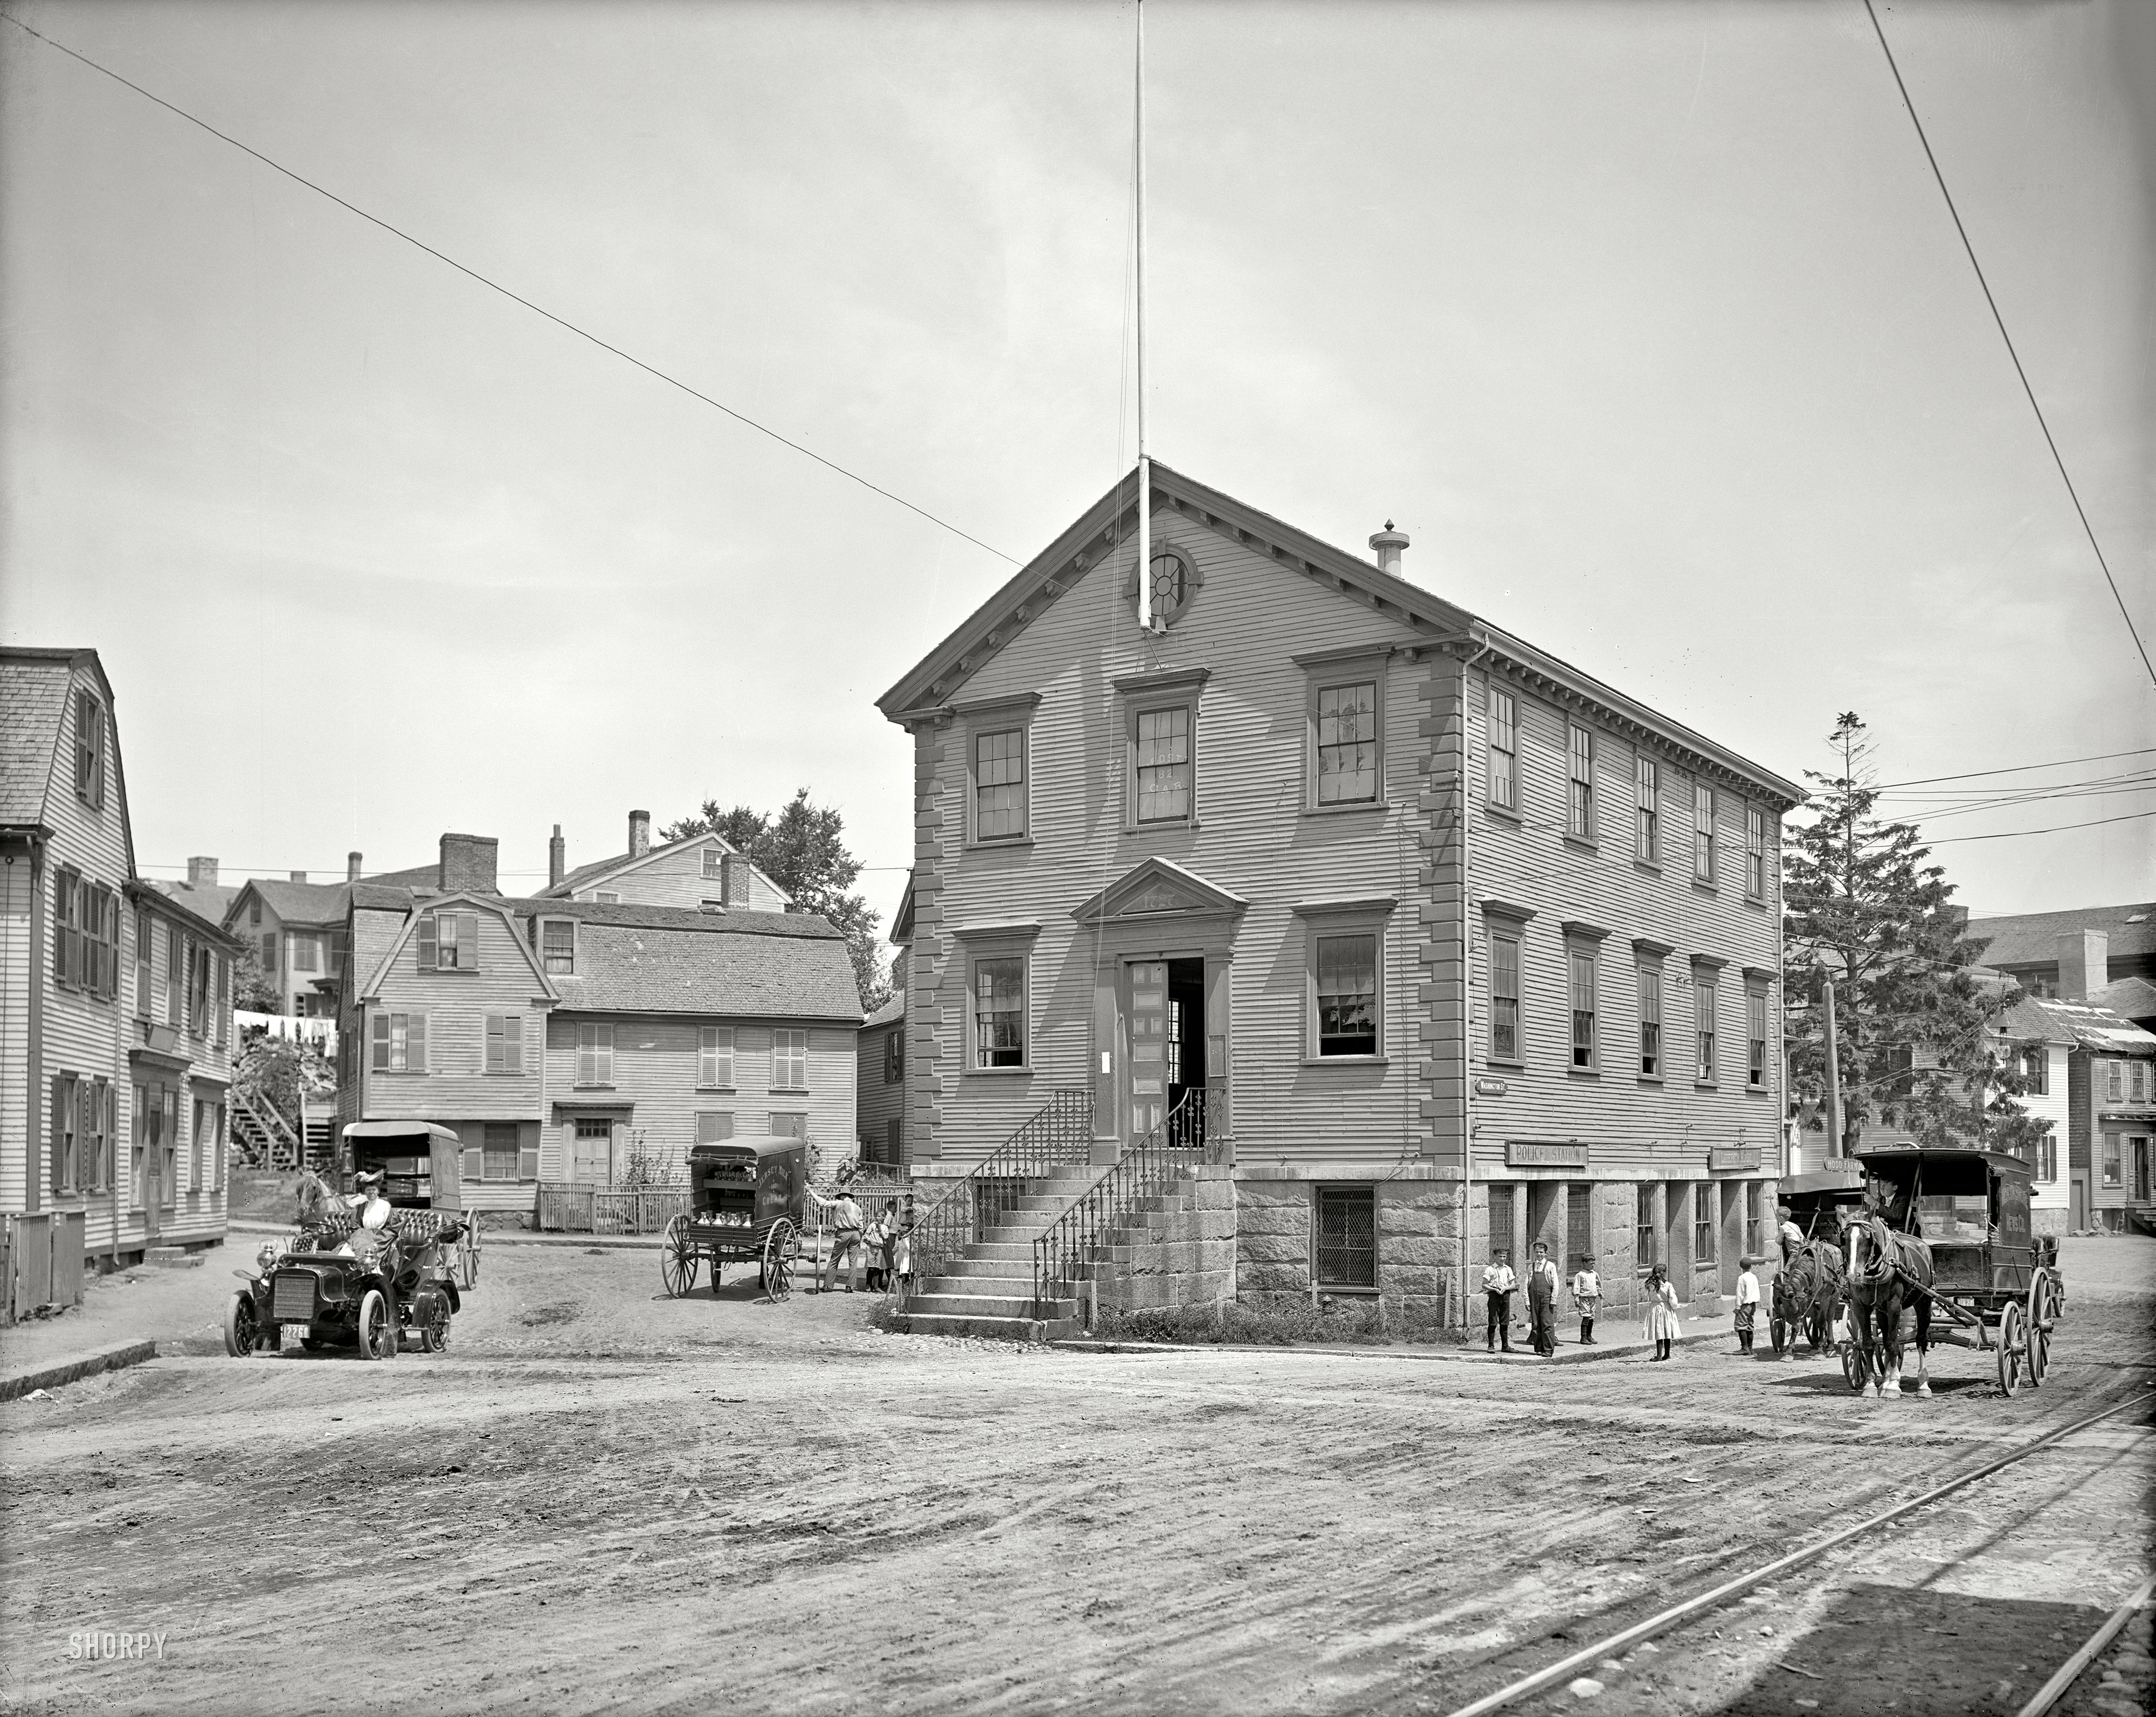 Circa 1906. "Old town hall -- Marblehead, Massachusetts." 8x10 inch dry plate glass negative, Detroit Publishing Company. View full size.